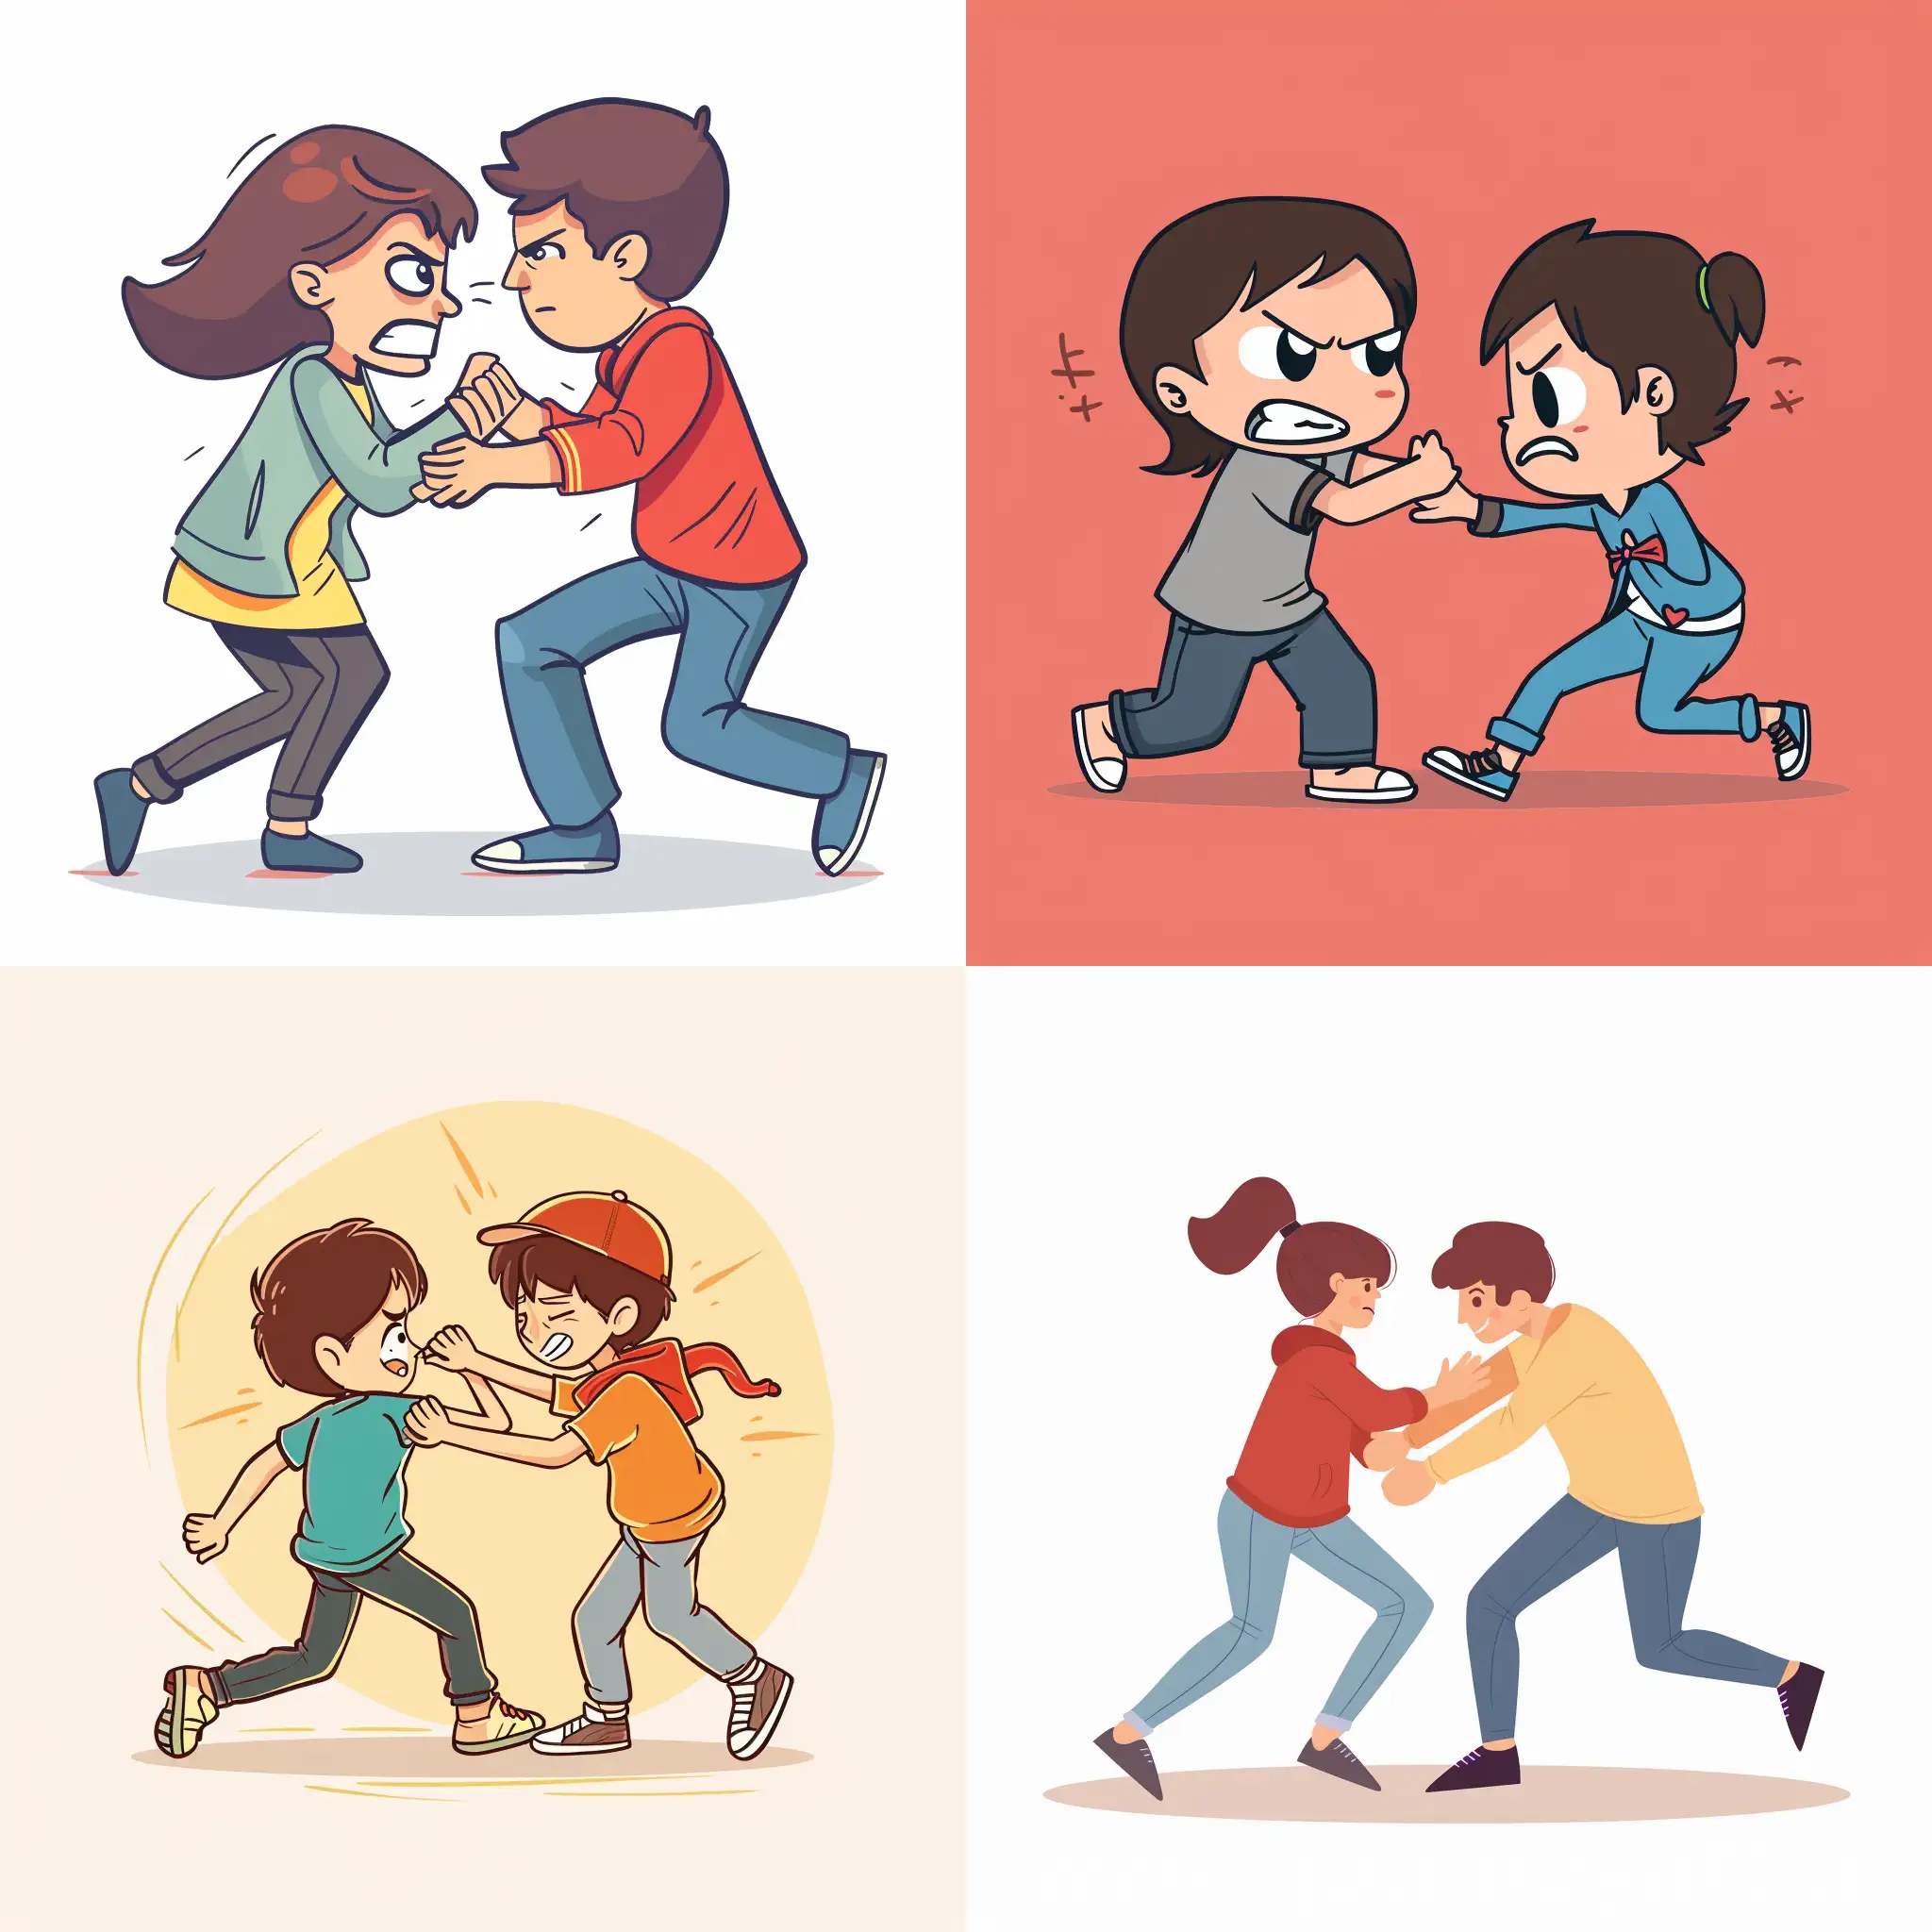 Cartoon-Style-Illustration-of-Person-Pushing-Another